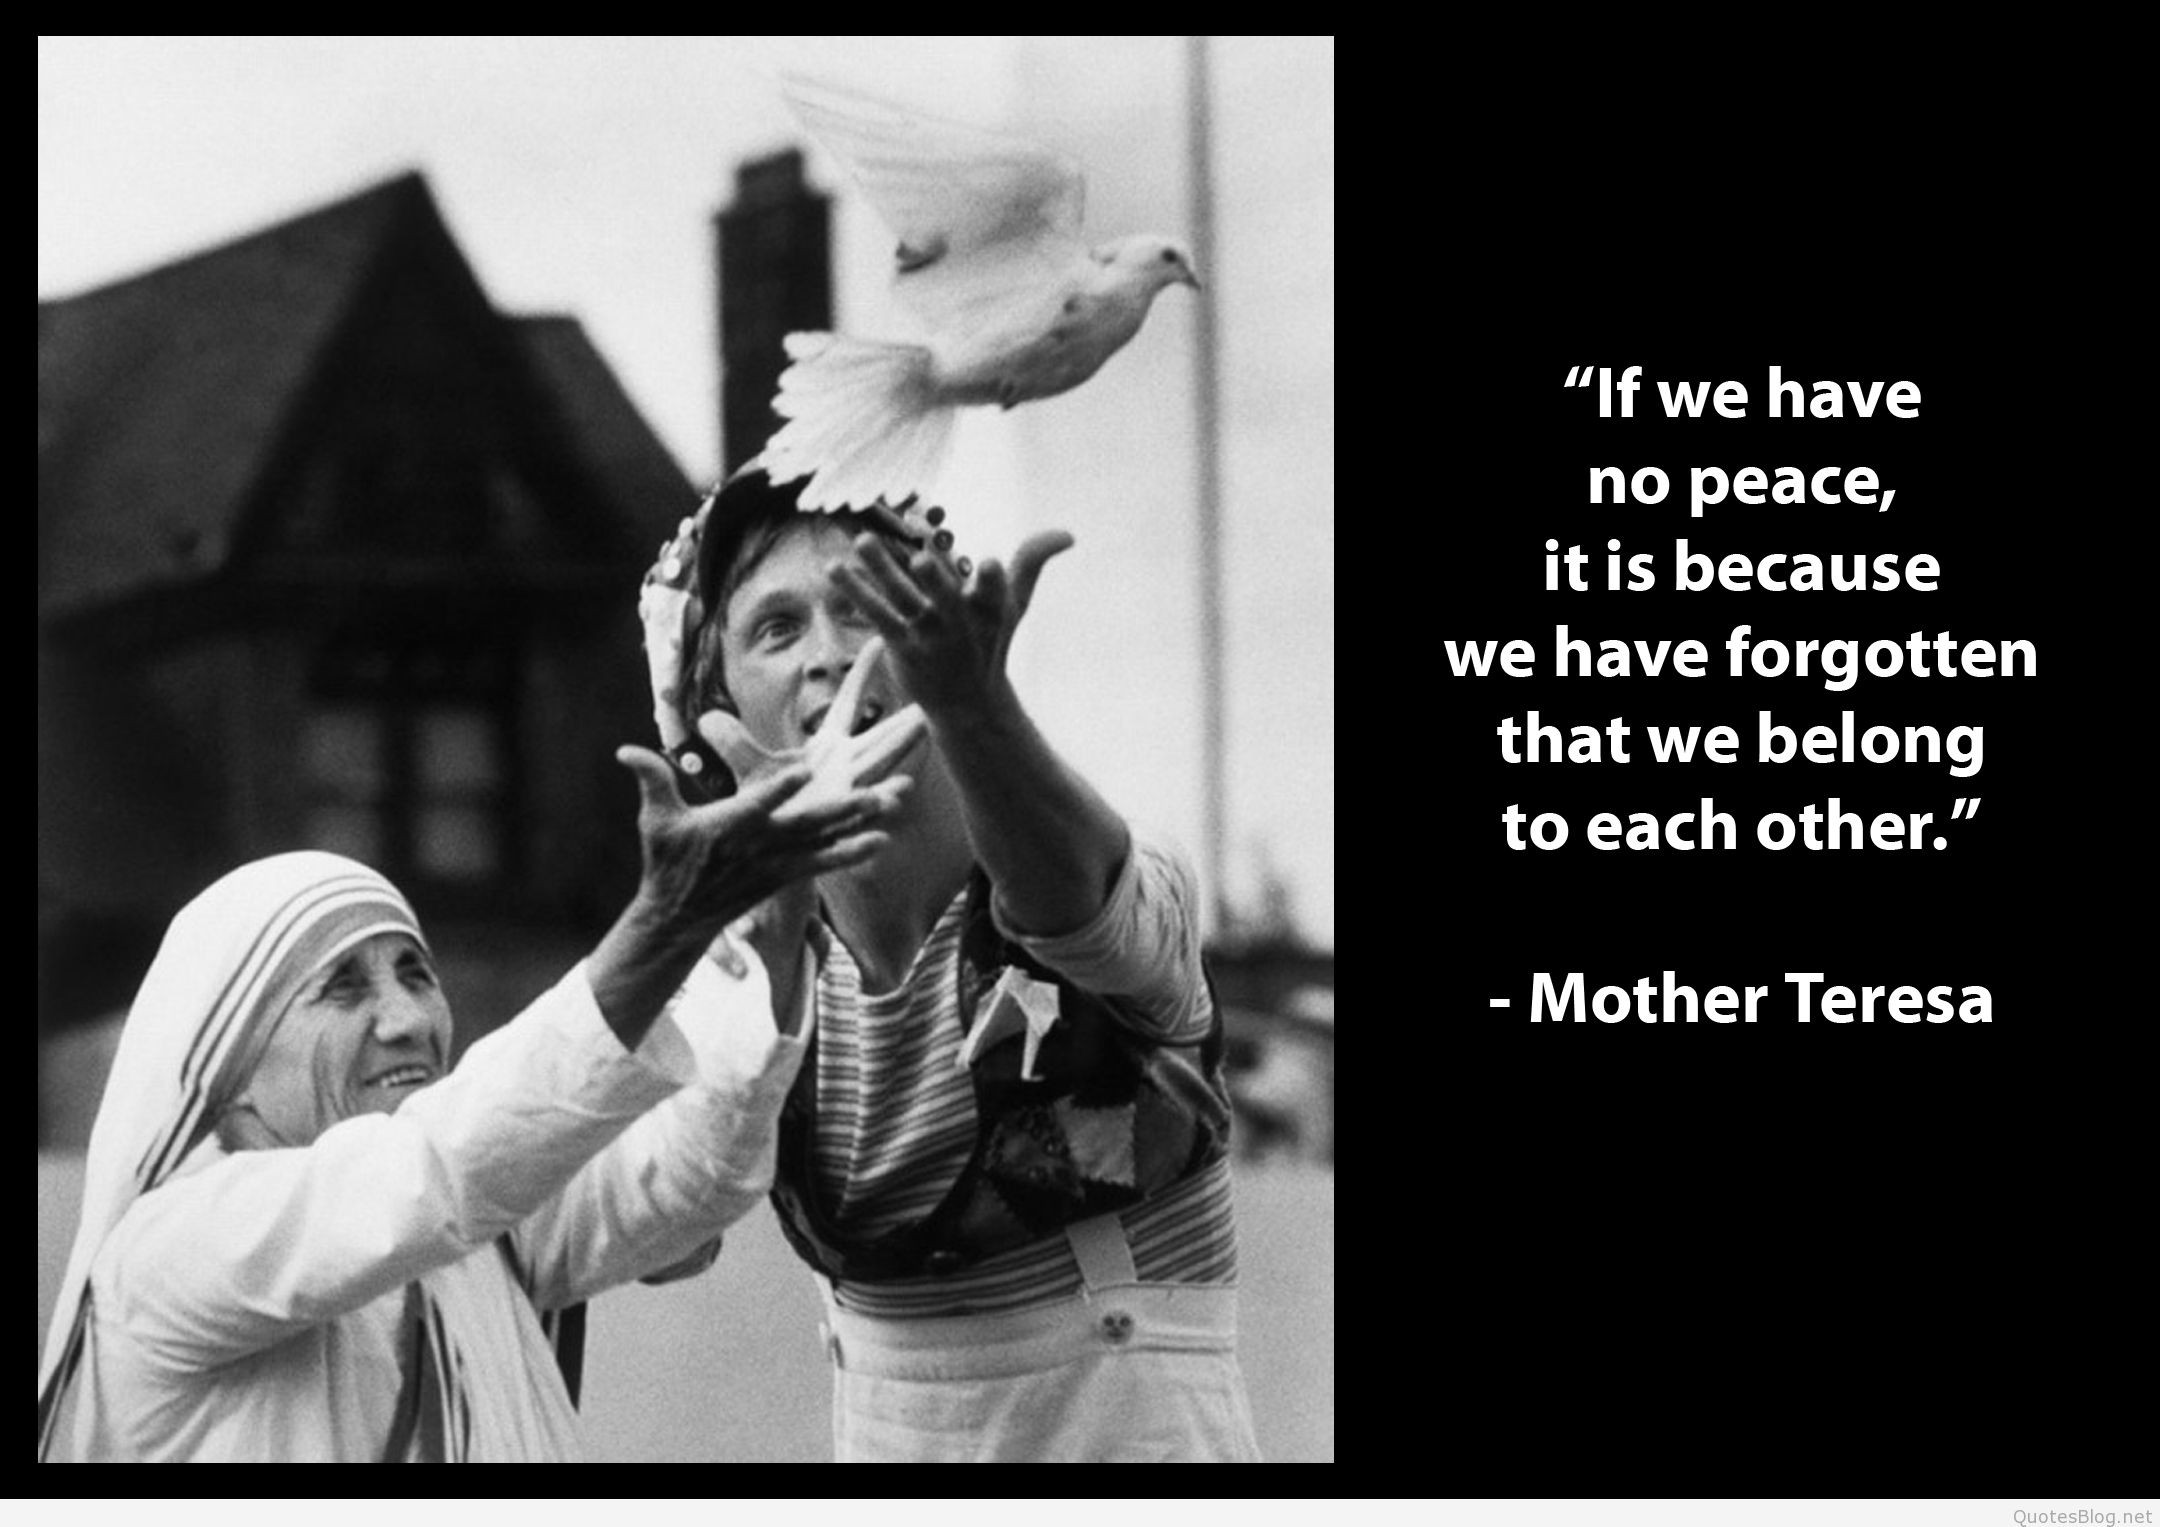 Mother Teresa Peace Quote
 Mother Theresa Brainy Quotes and sayings